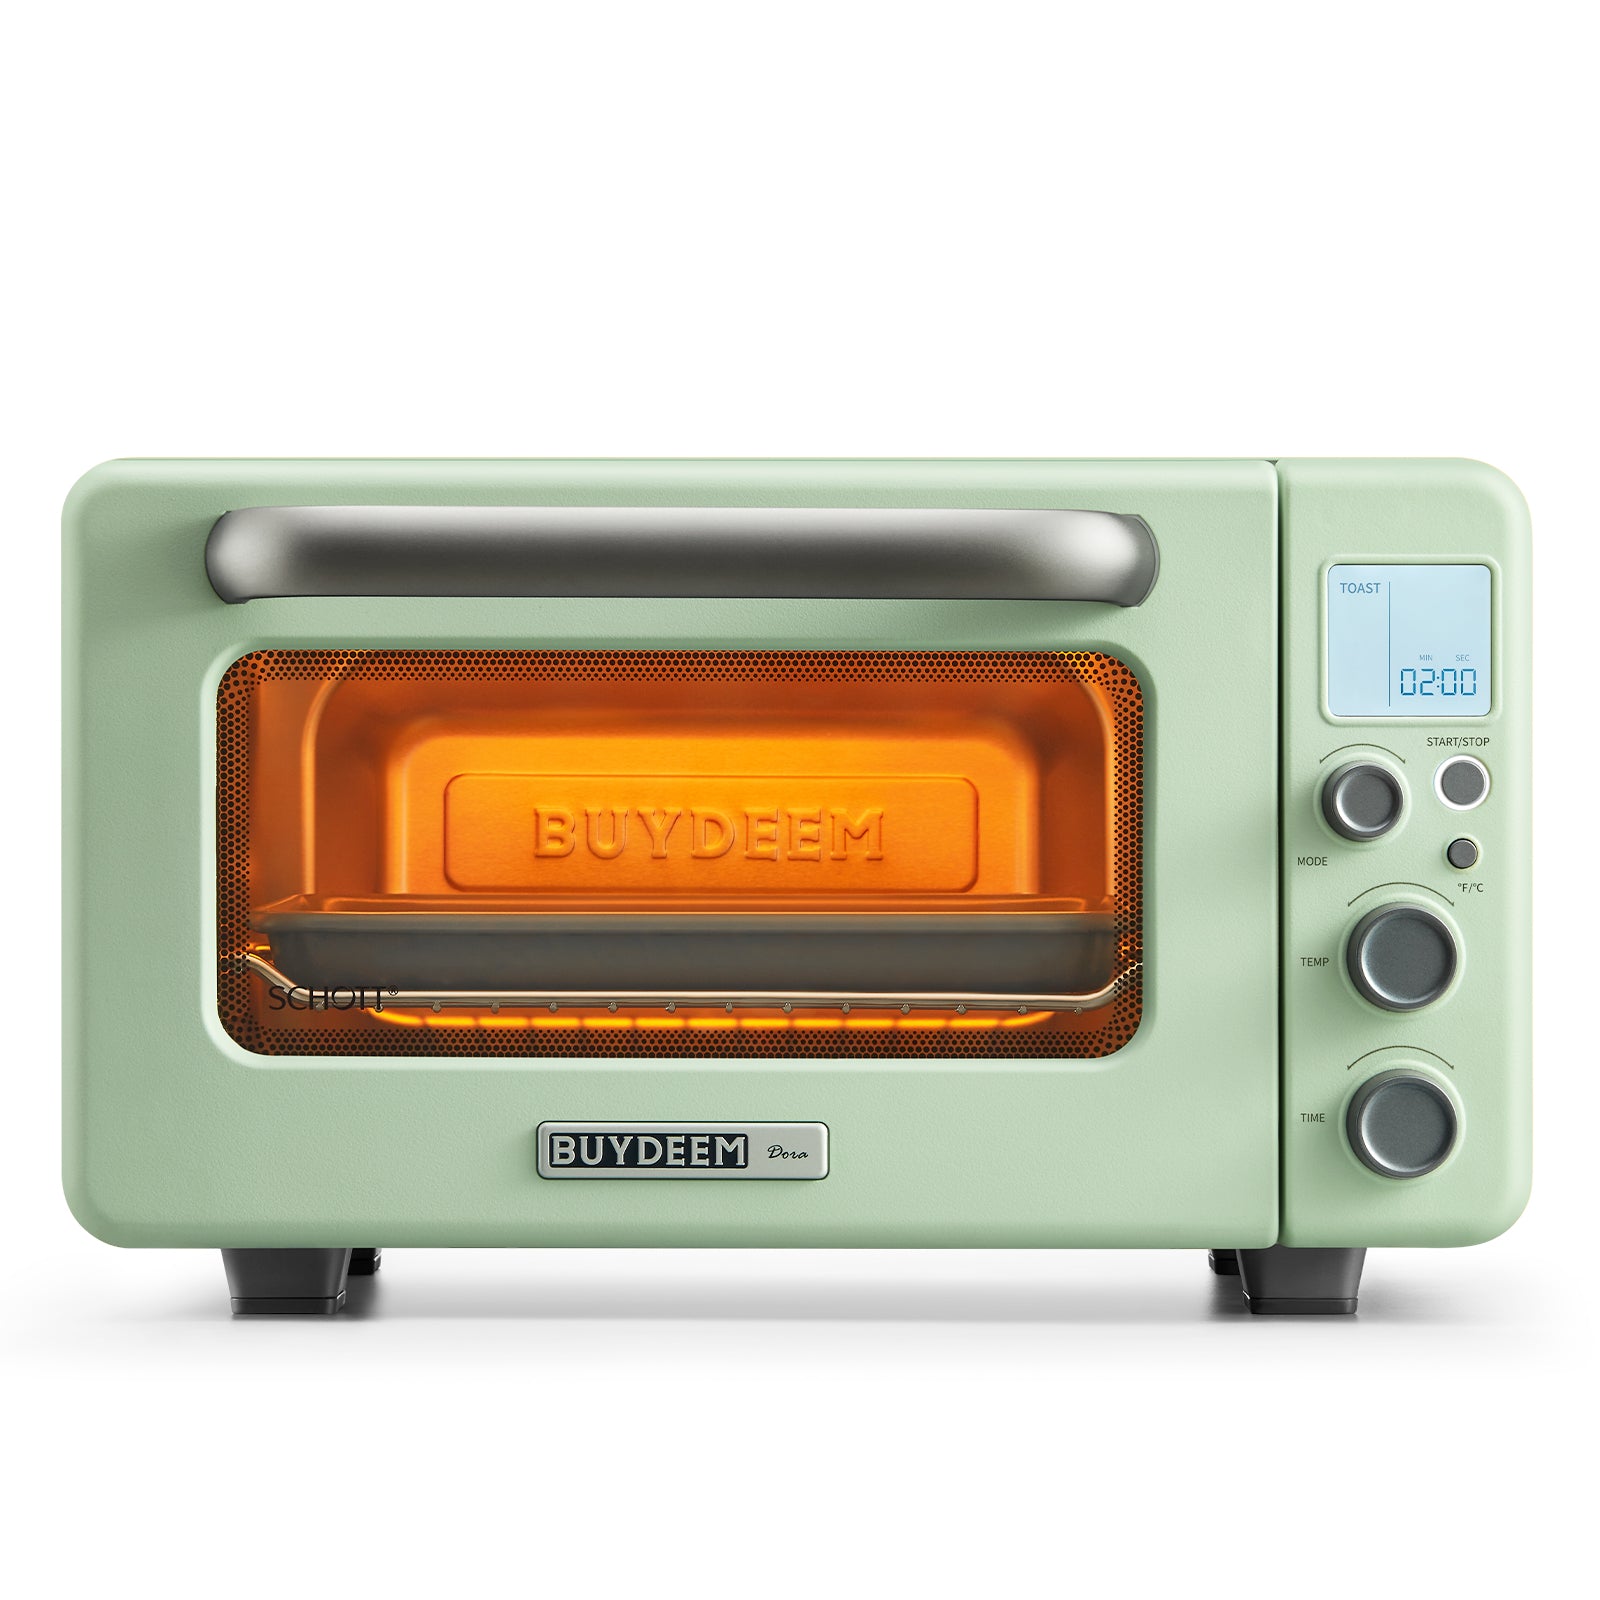 Smart Oven: 12-in-1 Table Top Oven